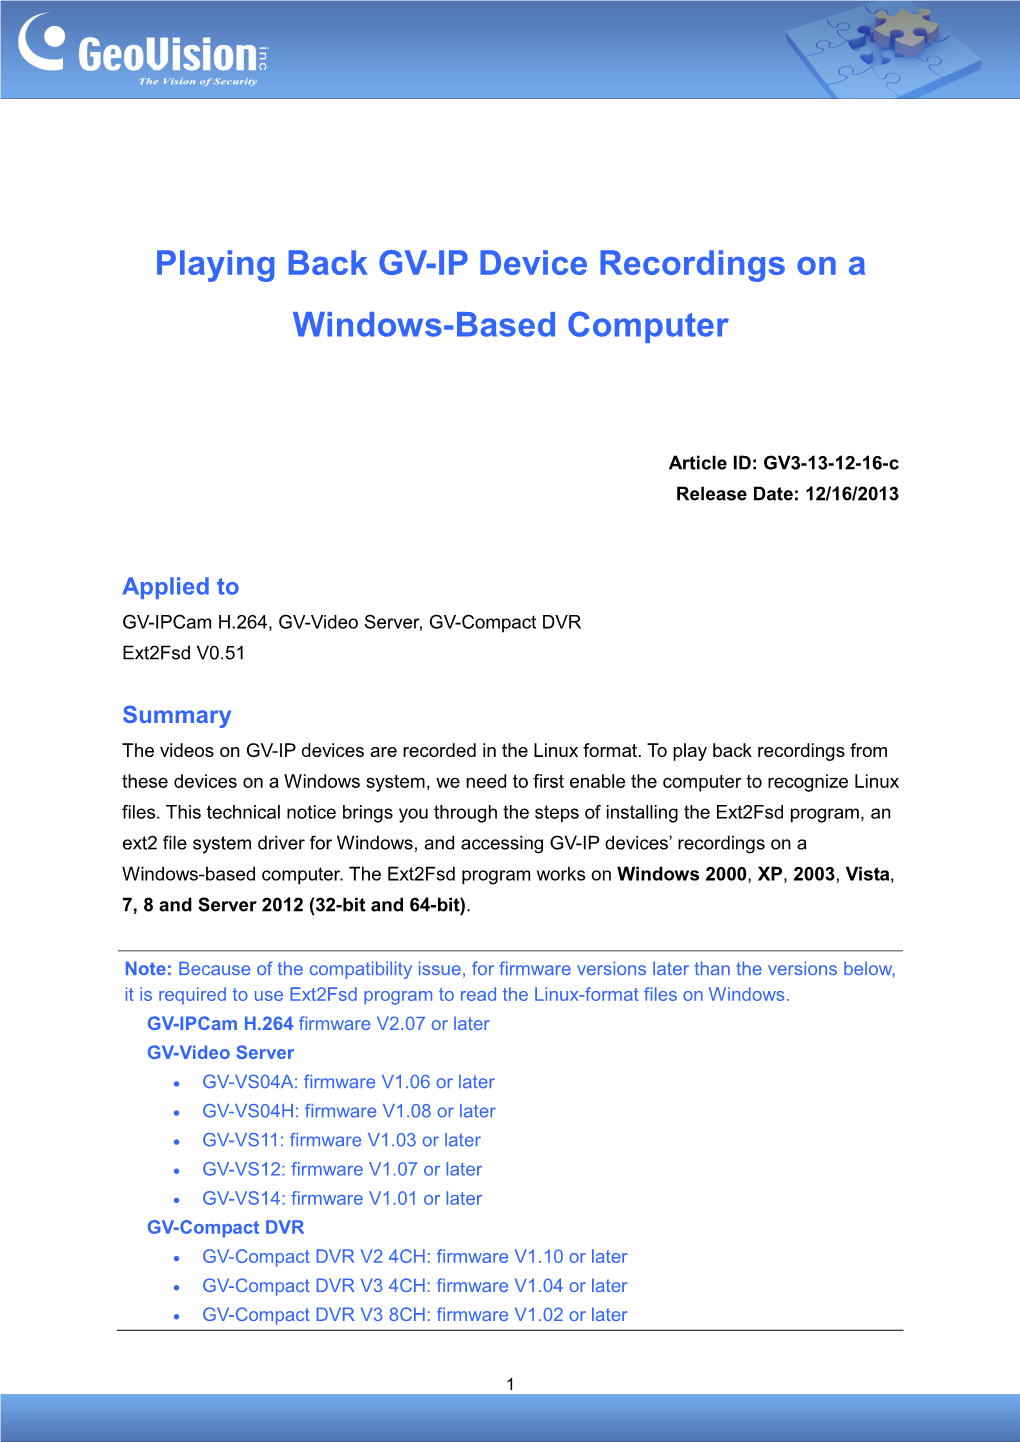 Playing Back GV-IP Device Recordings on a Windows-Based Computer